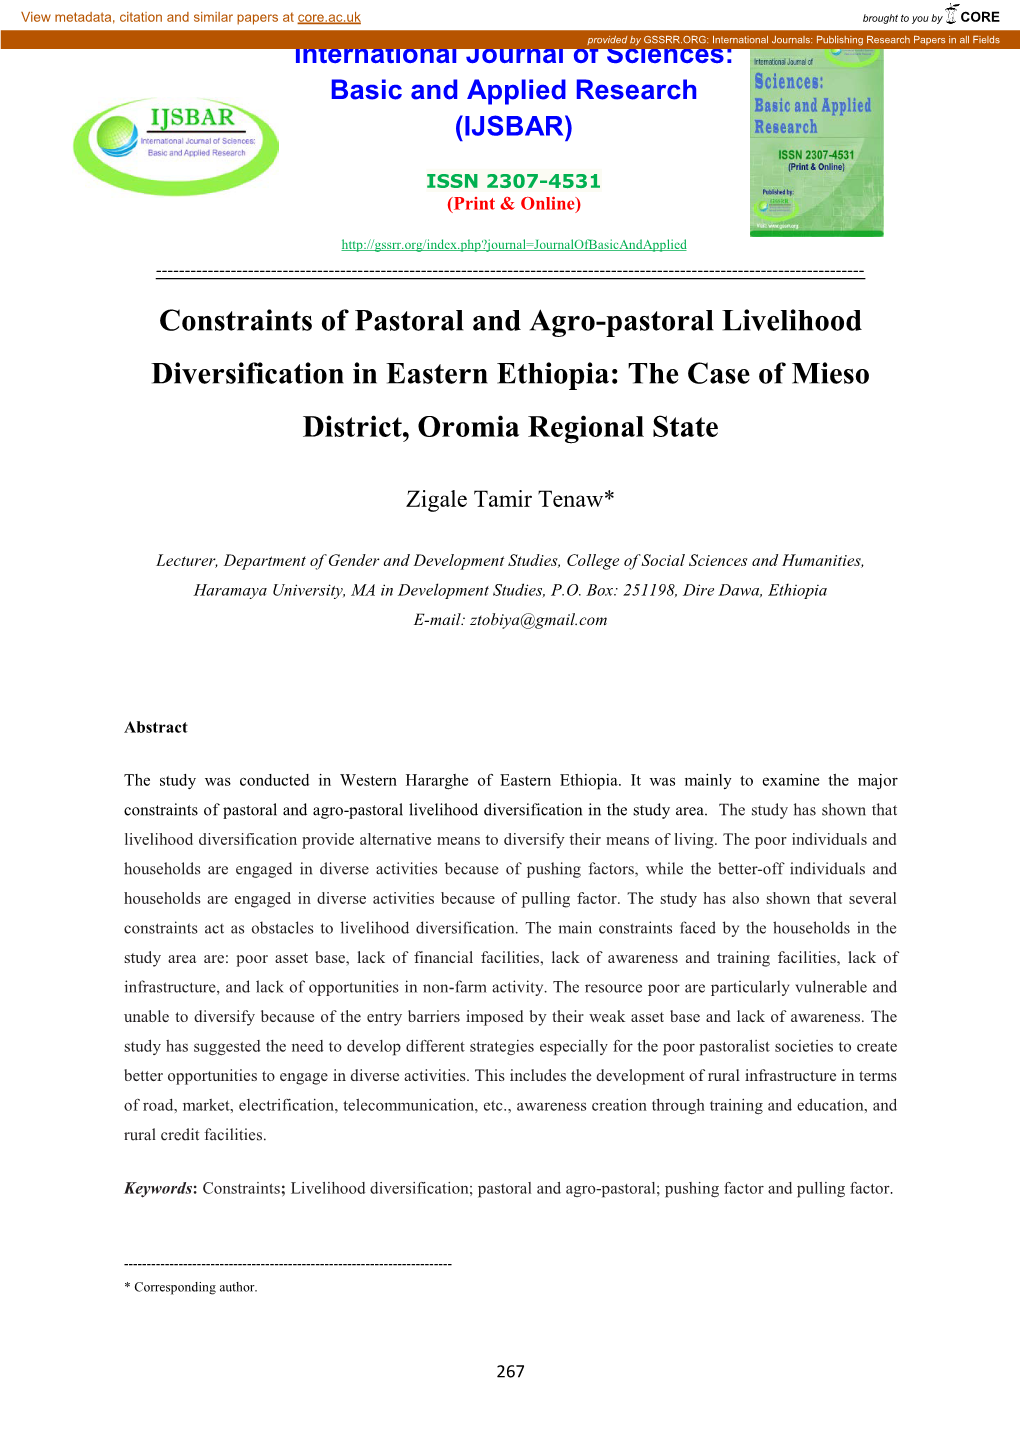 Constraints of Pastoral and Agro-Pastoral Livelihood Diversification in Eastern Ethiopia: the Case of Mieso District, Oromia Regional State